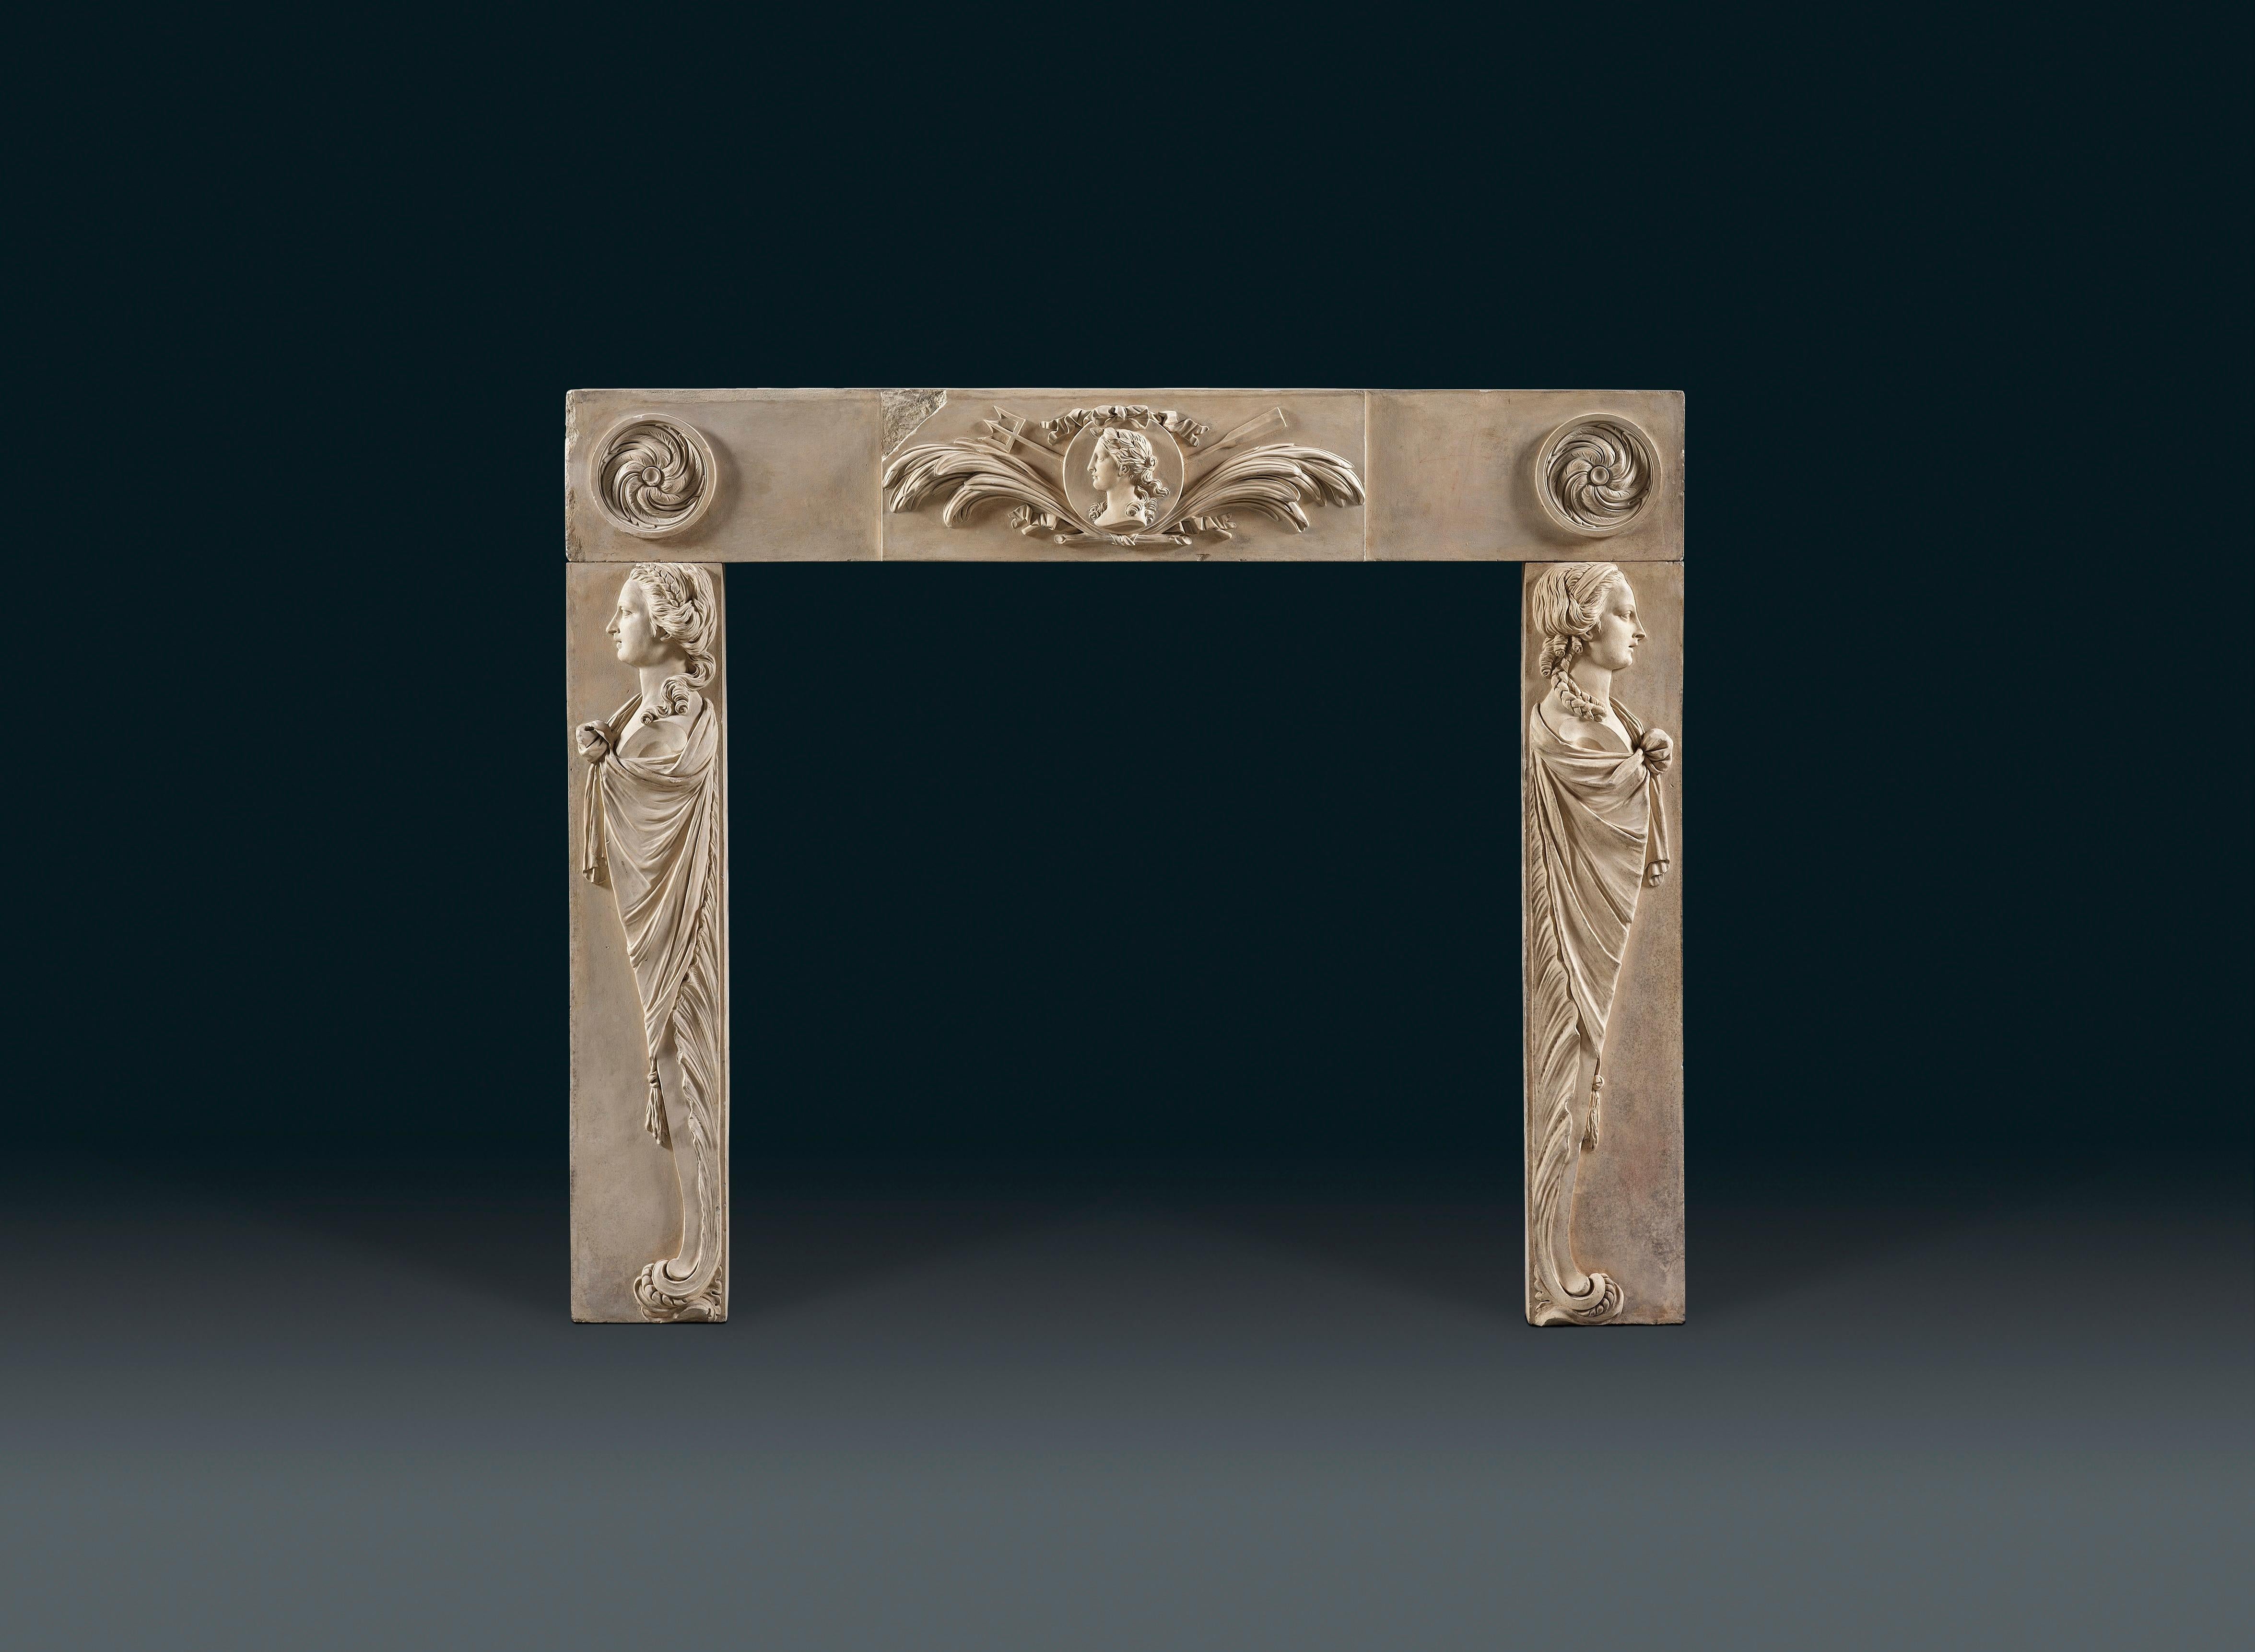 An 18th century coade stone chimney piece probably from a paneled room. The frieze with a central tablet of a Roman female head flanked by acanthus sprays, a trident and oar. The blockings on either side with well carved swirling paterae. The jambs